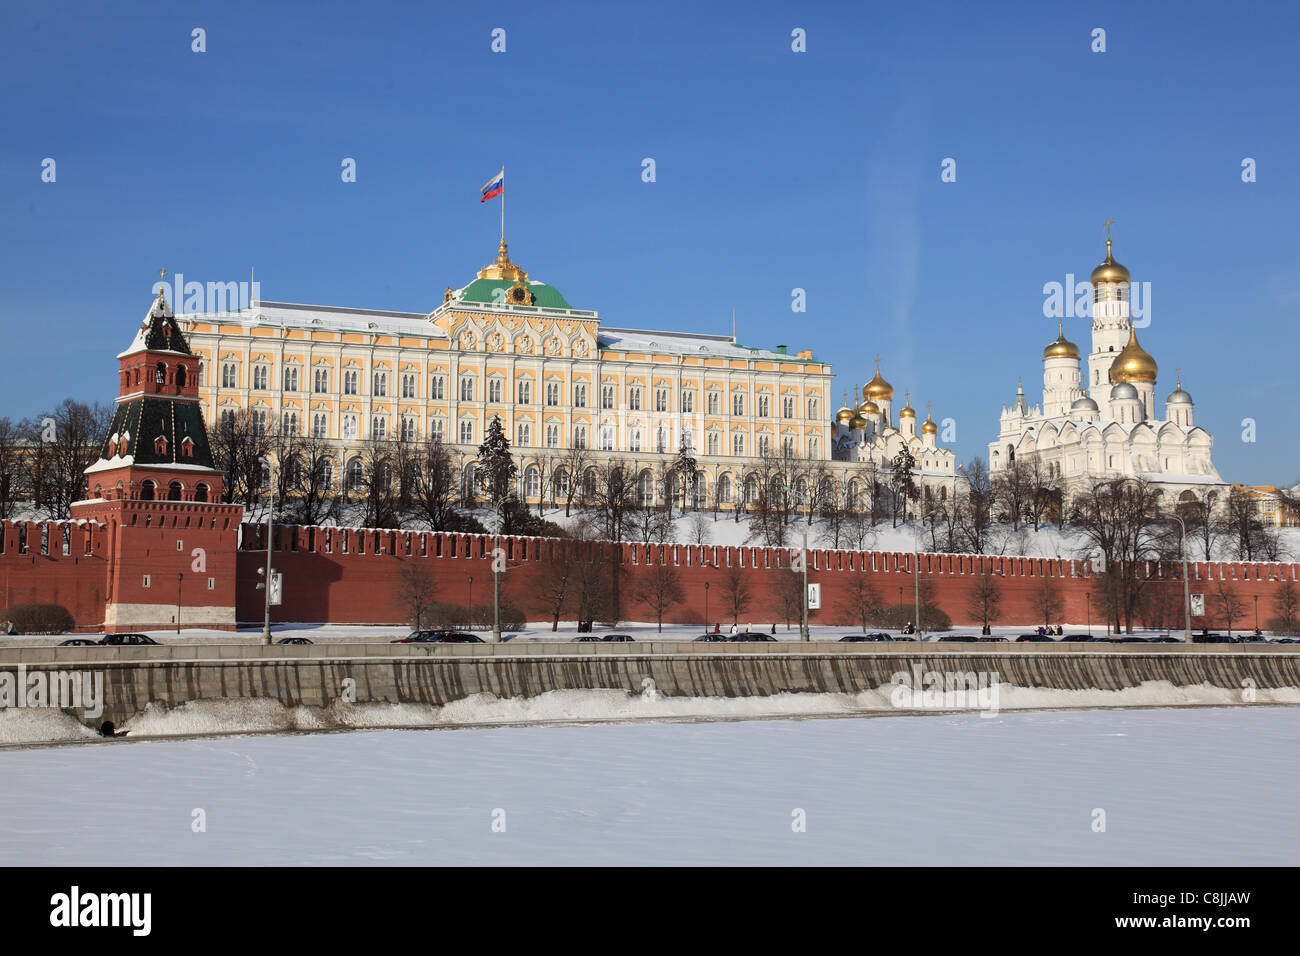 Moscow, Russian Federation. View of Kremlin and Grand Kremlin Palace with Moskva river in foreground. Winter Stock Photo